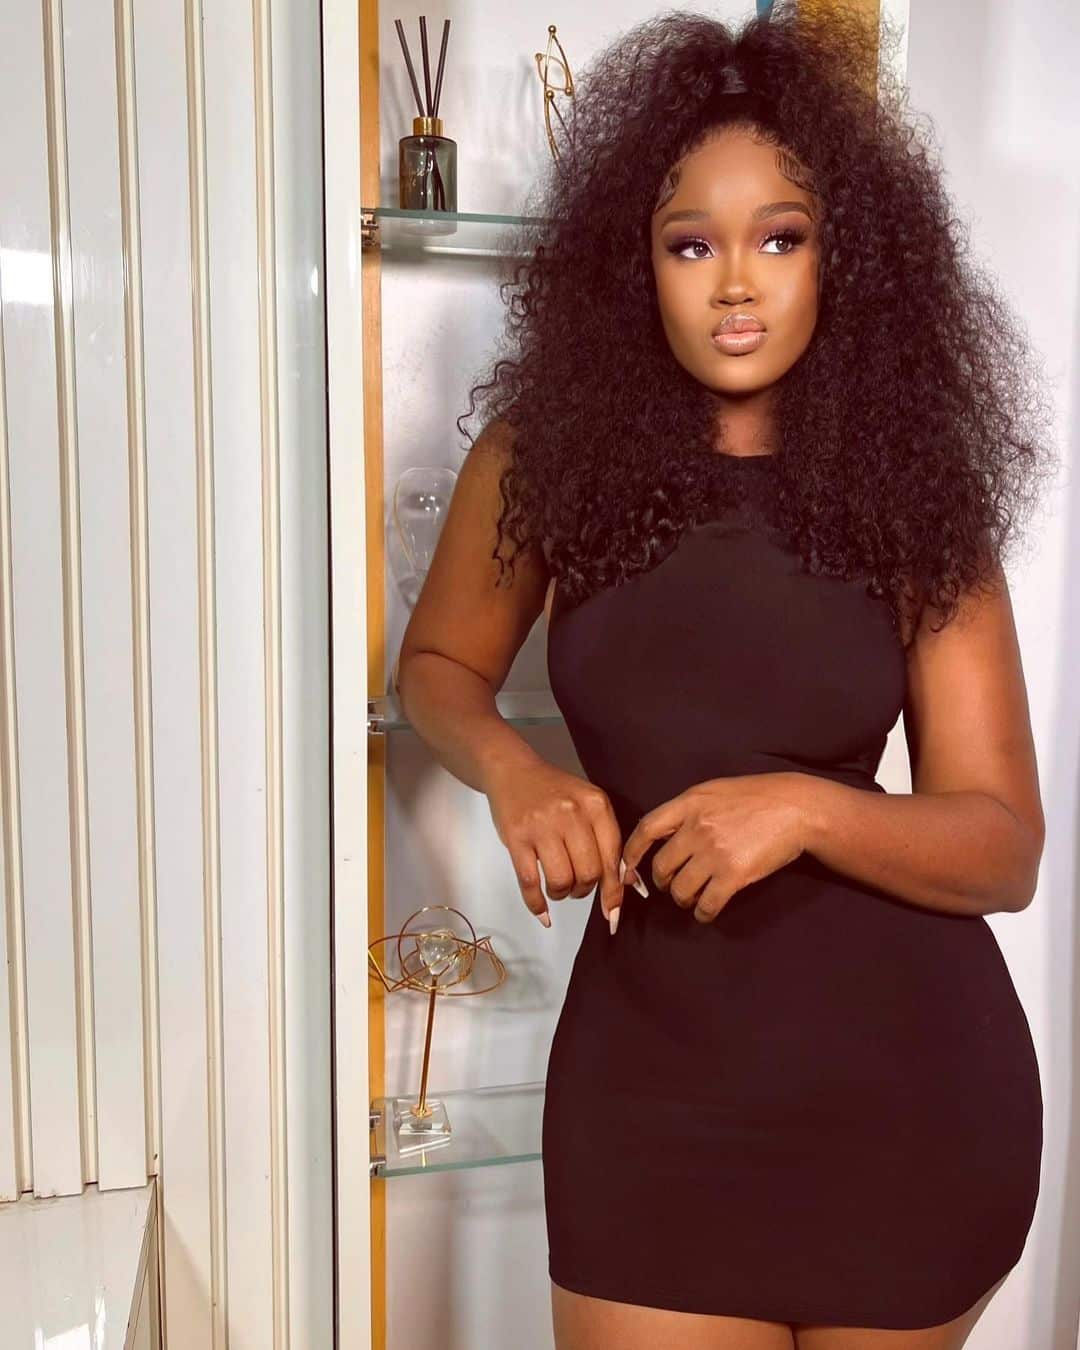 "If you are not paying me, you’re not my friend" – CeeC